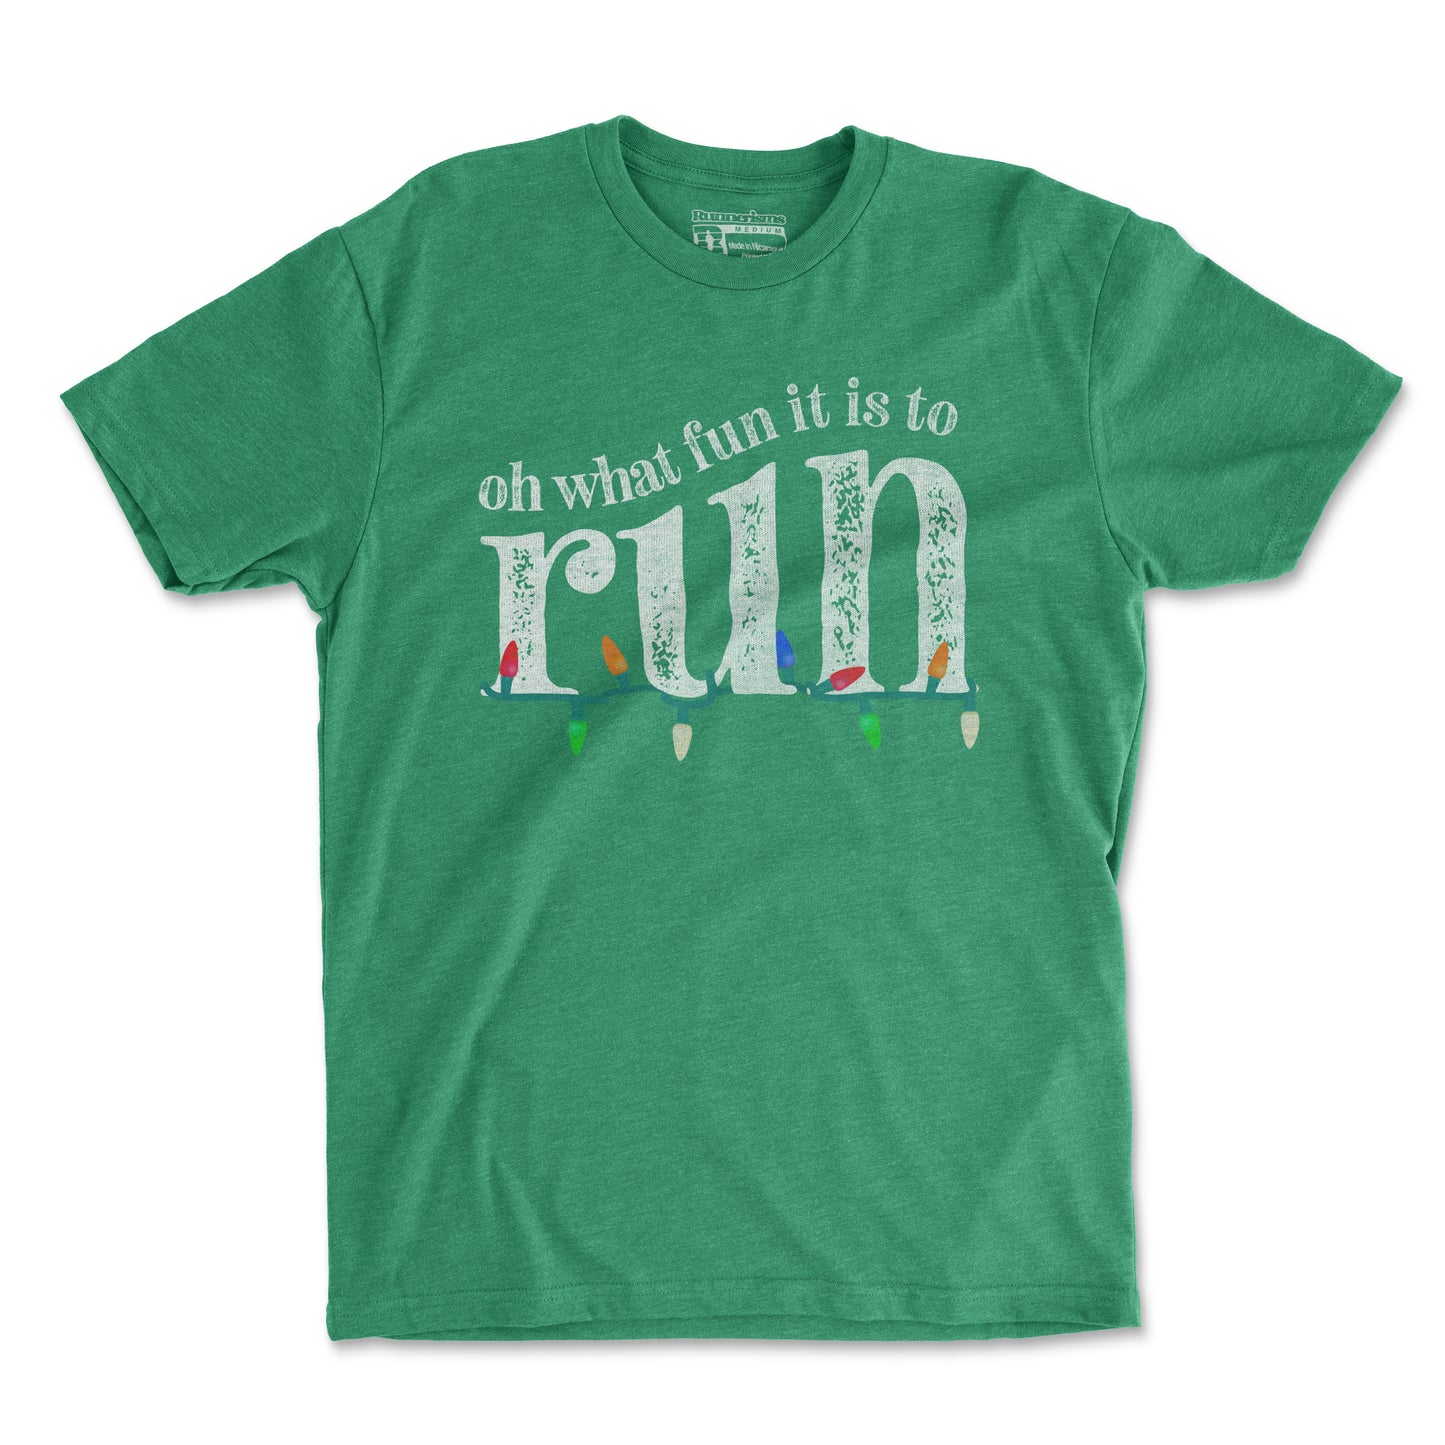 Oh What Fun It Is To Run - Unisex T Shirt